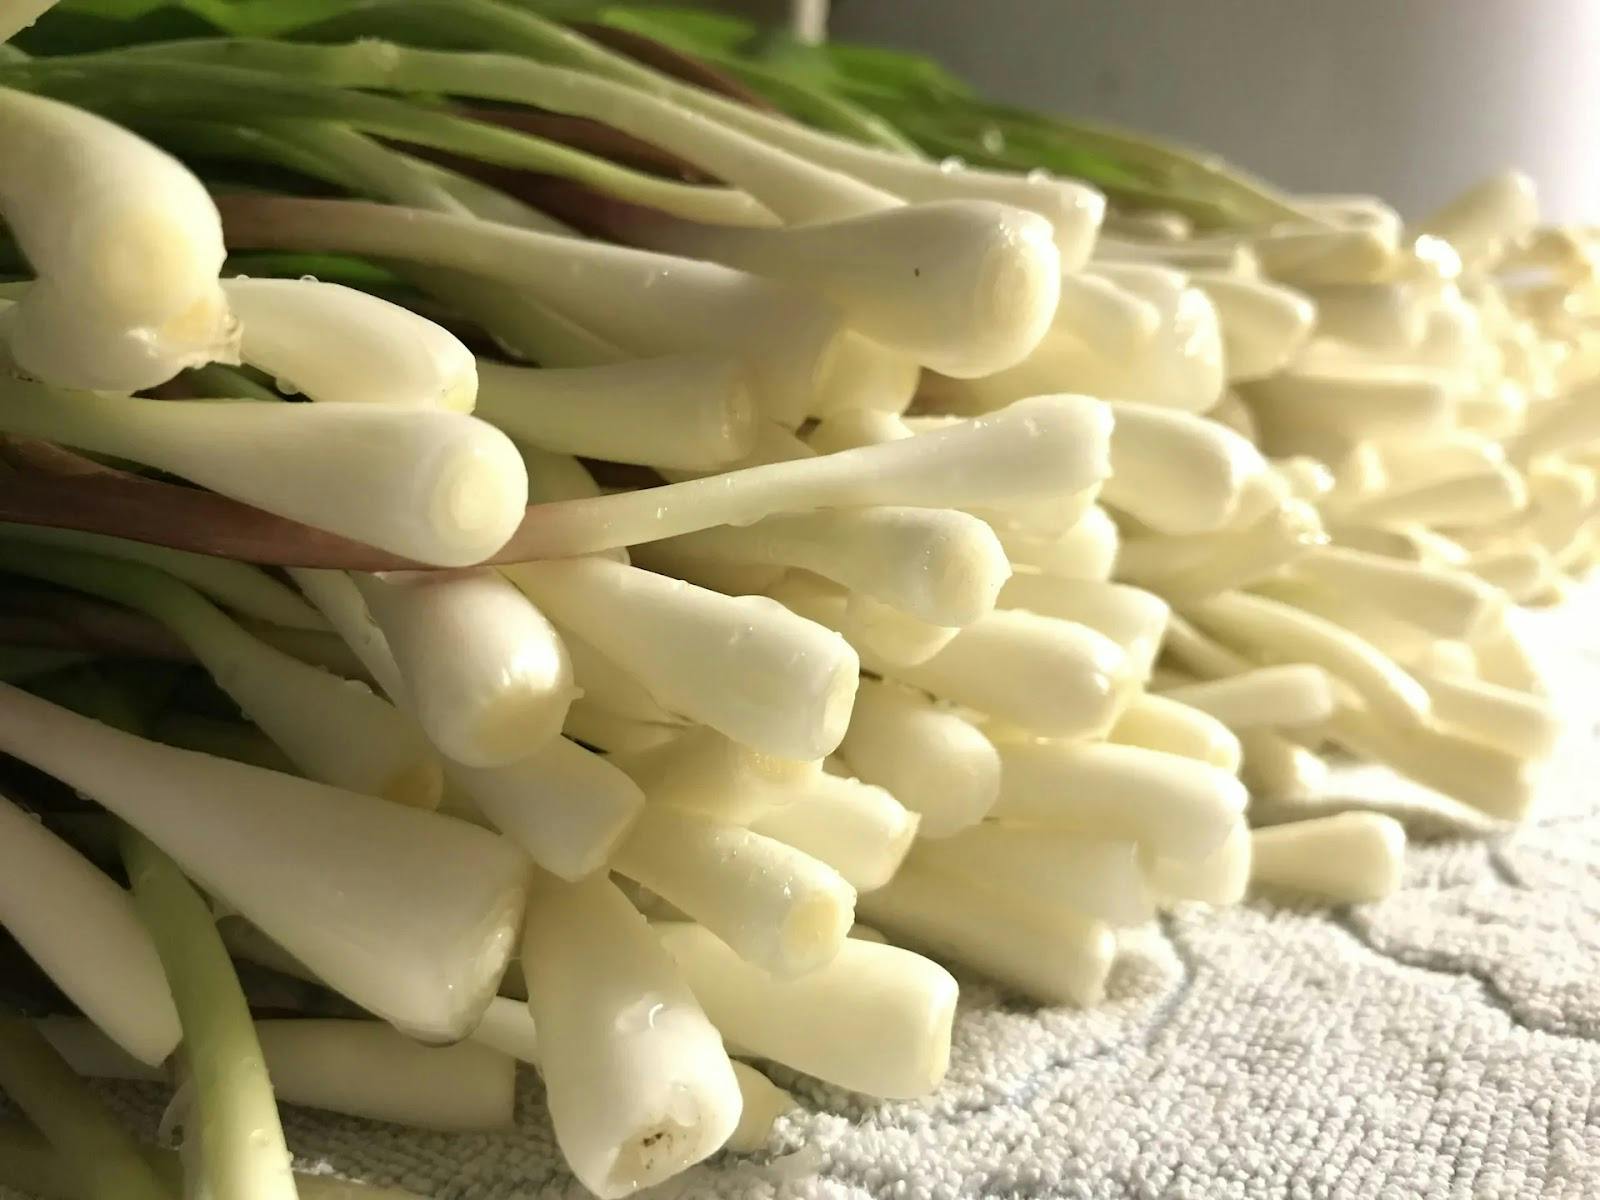 What Are Ramps Vegetable? Exploring the Origins and Culinary Delights of This Wild Plant